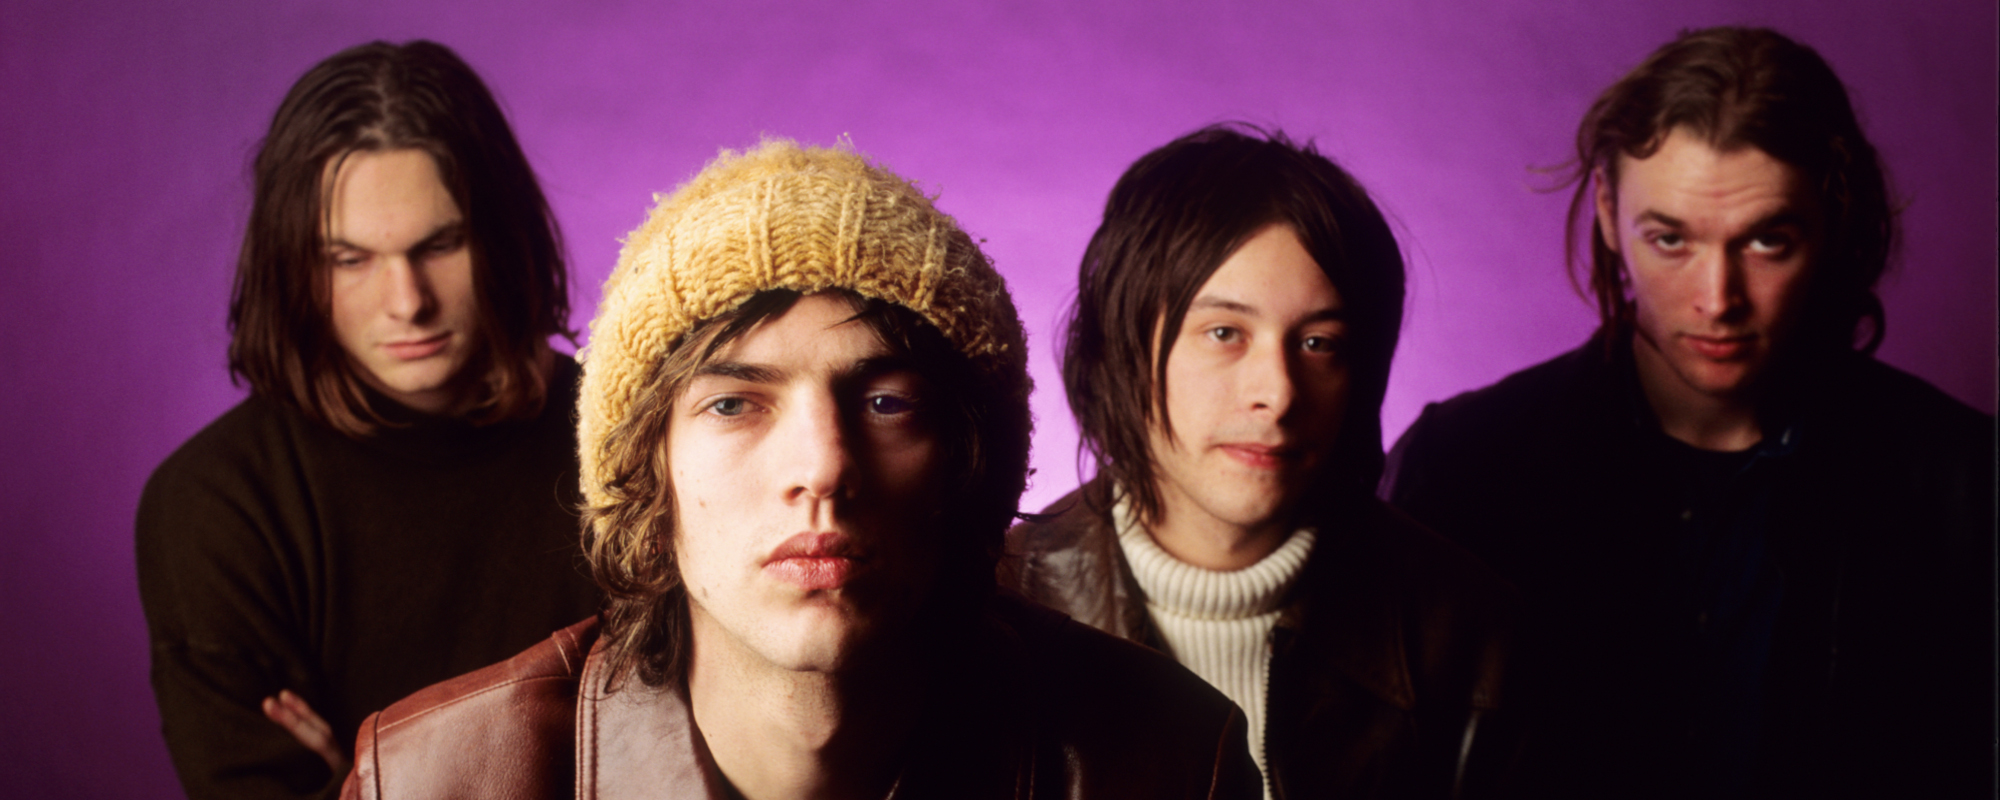 Behind the Meaning of the Song “Bitter Sweet Symphony” by The Verve